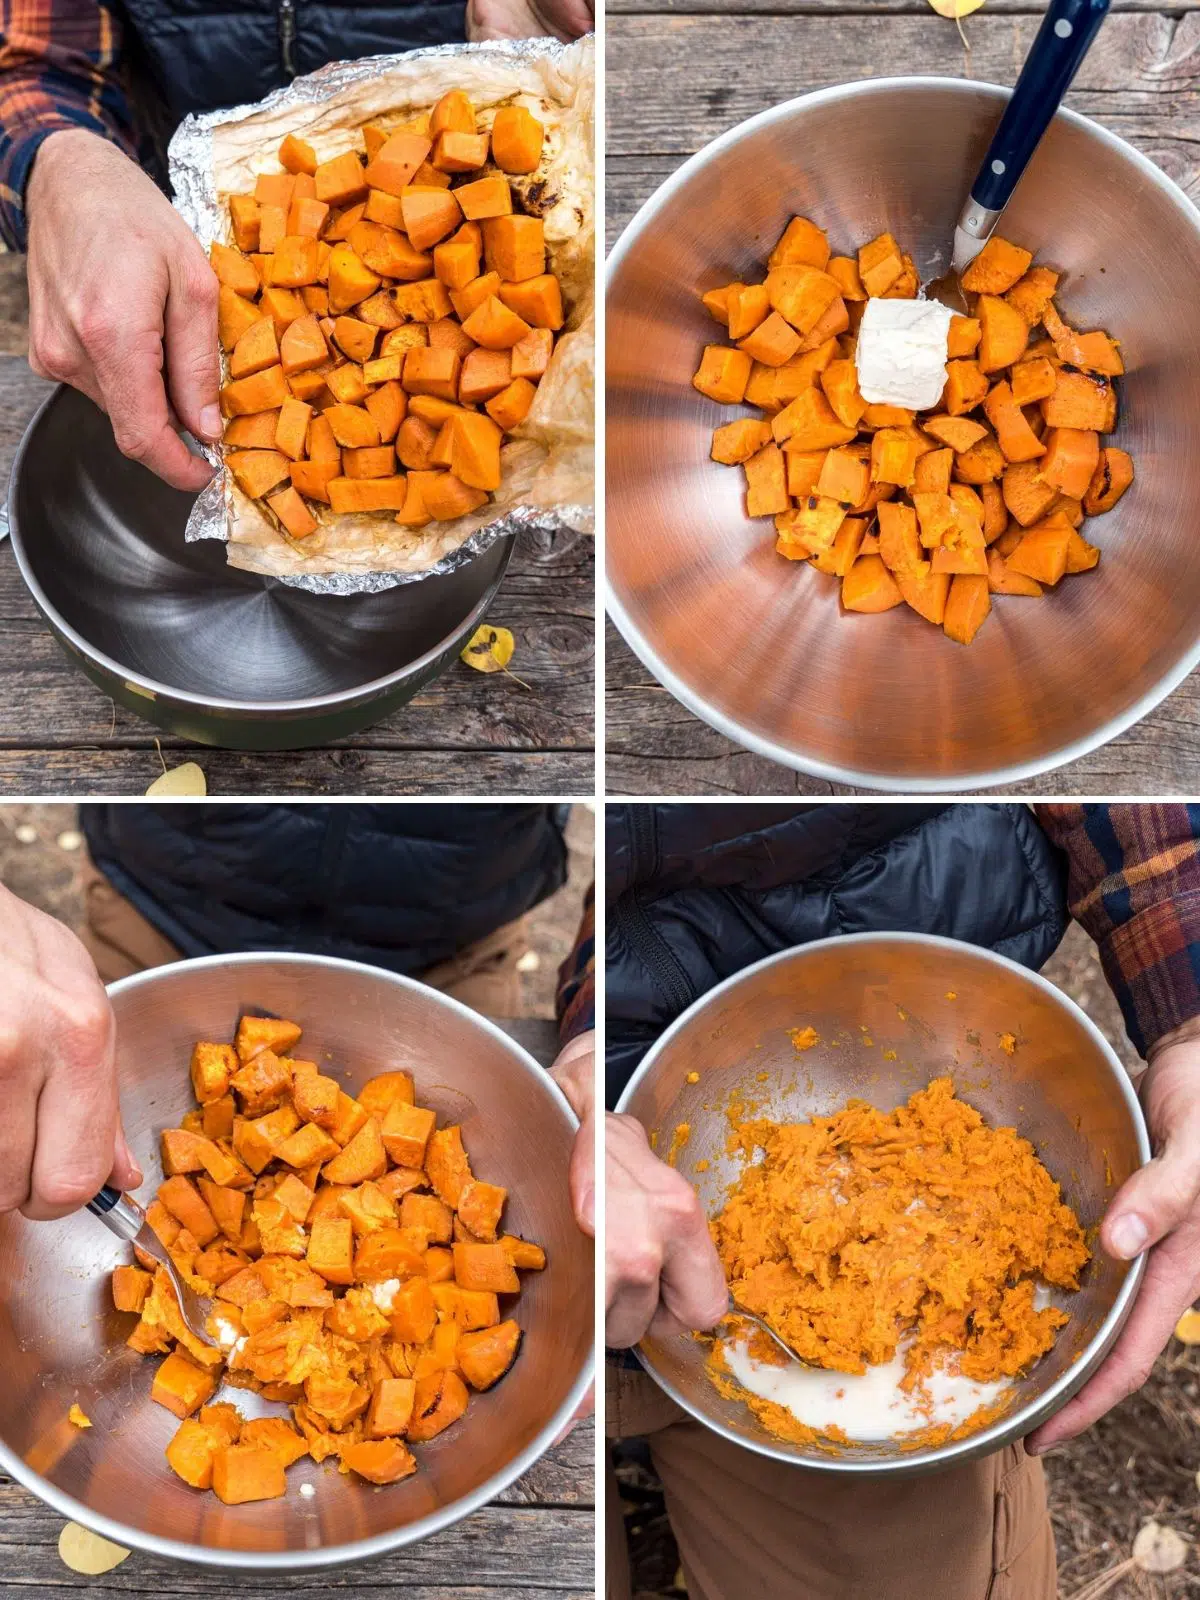 Foil packed mashed sweet potatoes steps 9-12